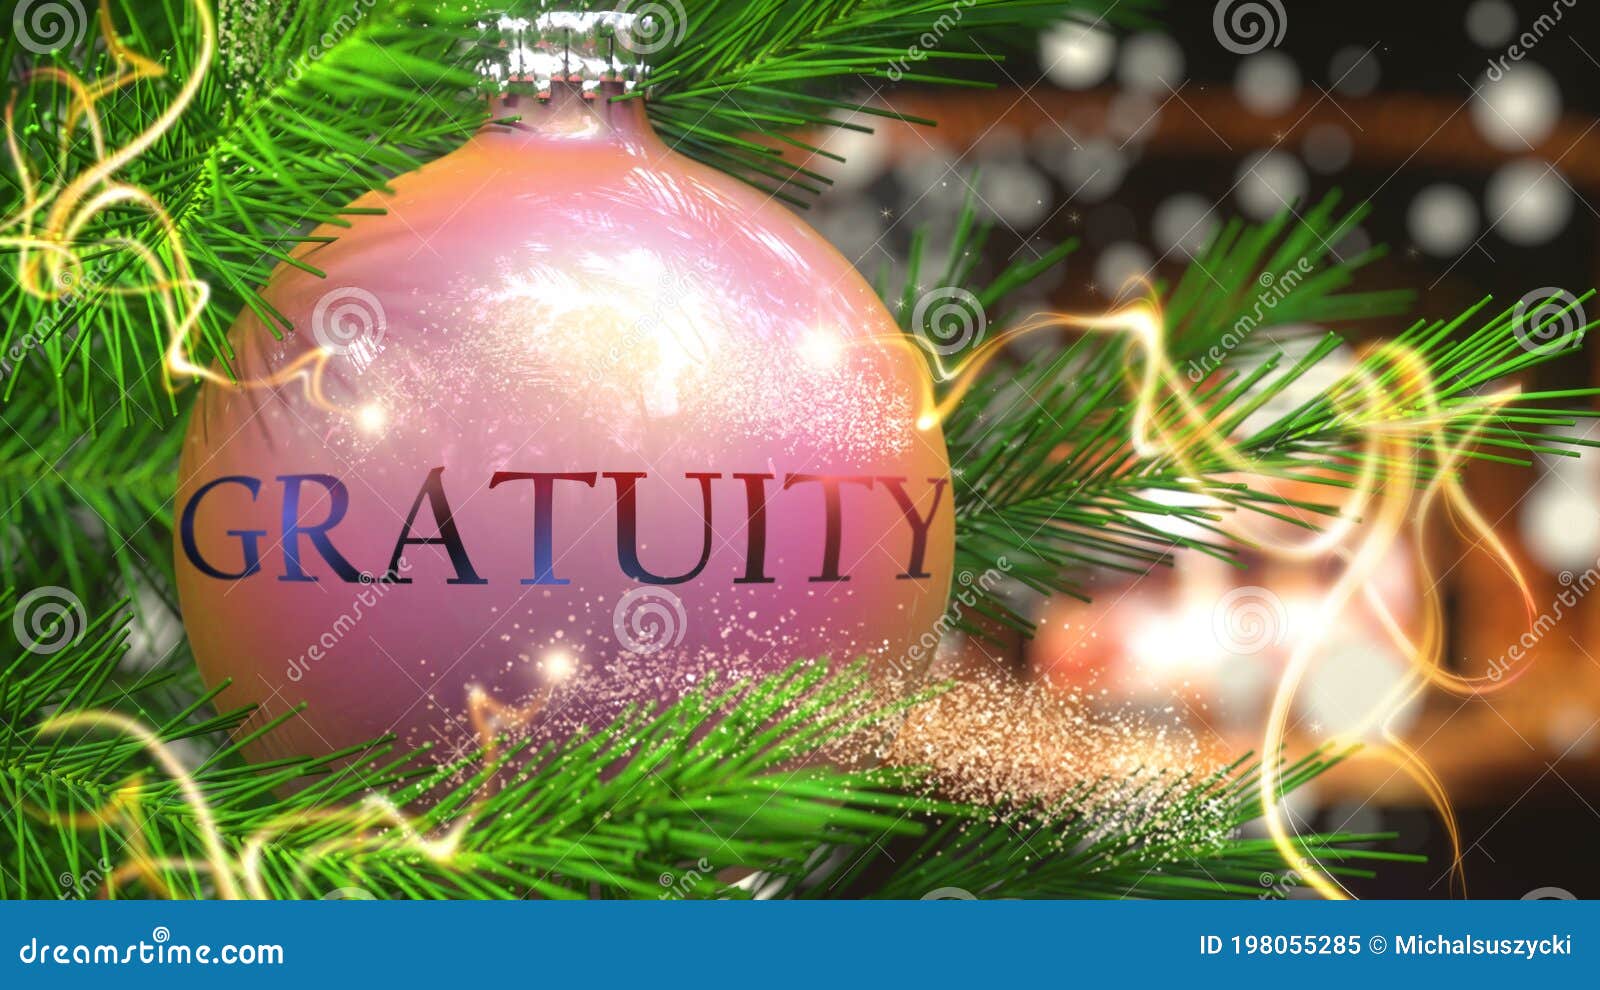 gratuity and christmas holidays, pictured as a christmas ornament ball with word gratuity and magic beams to ize the